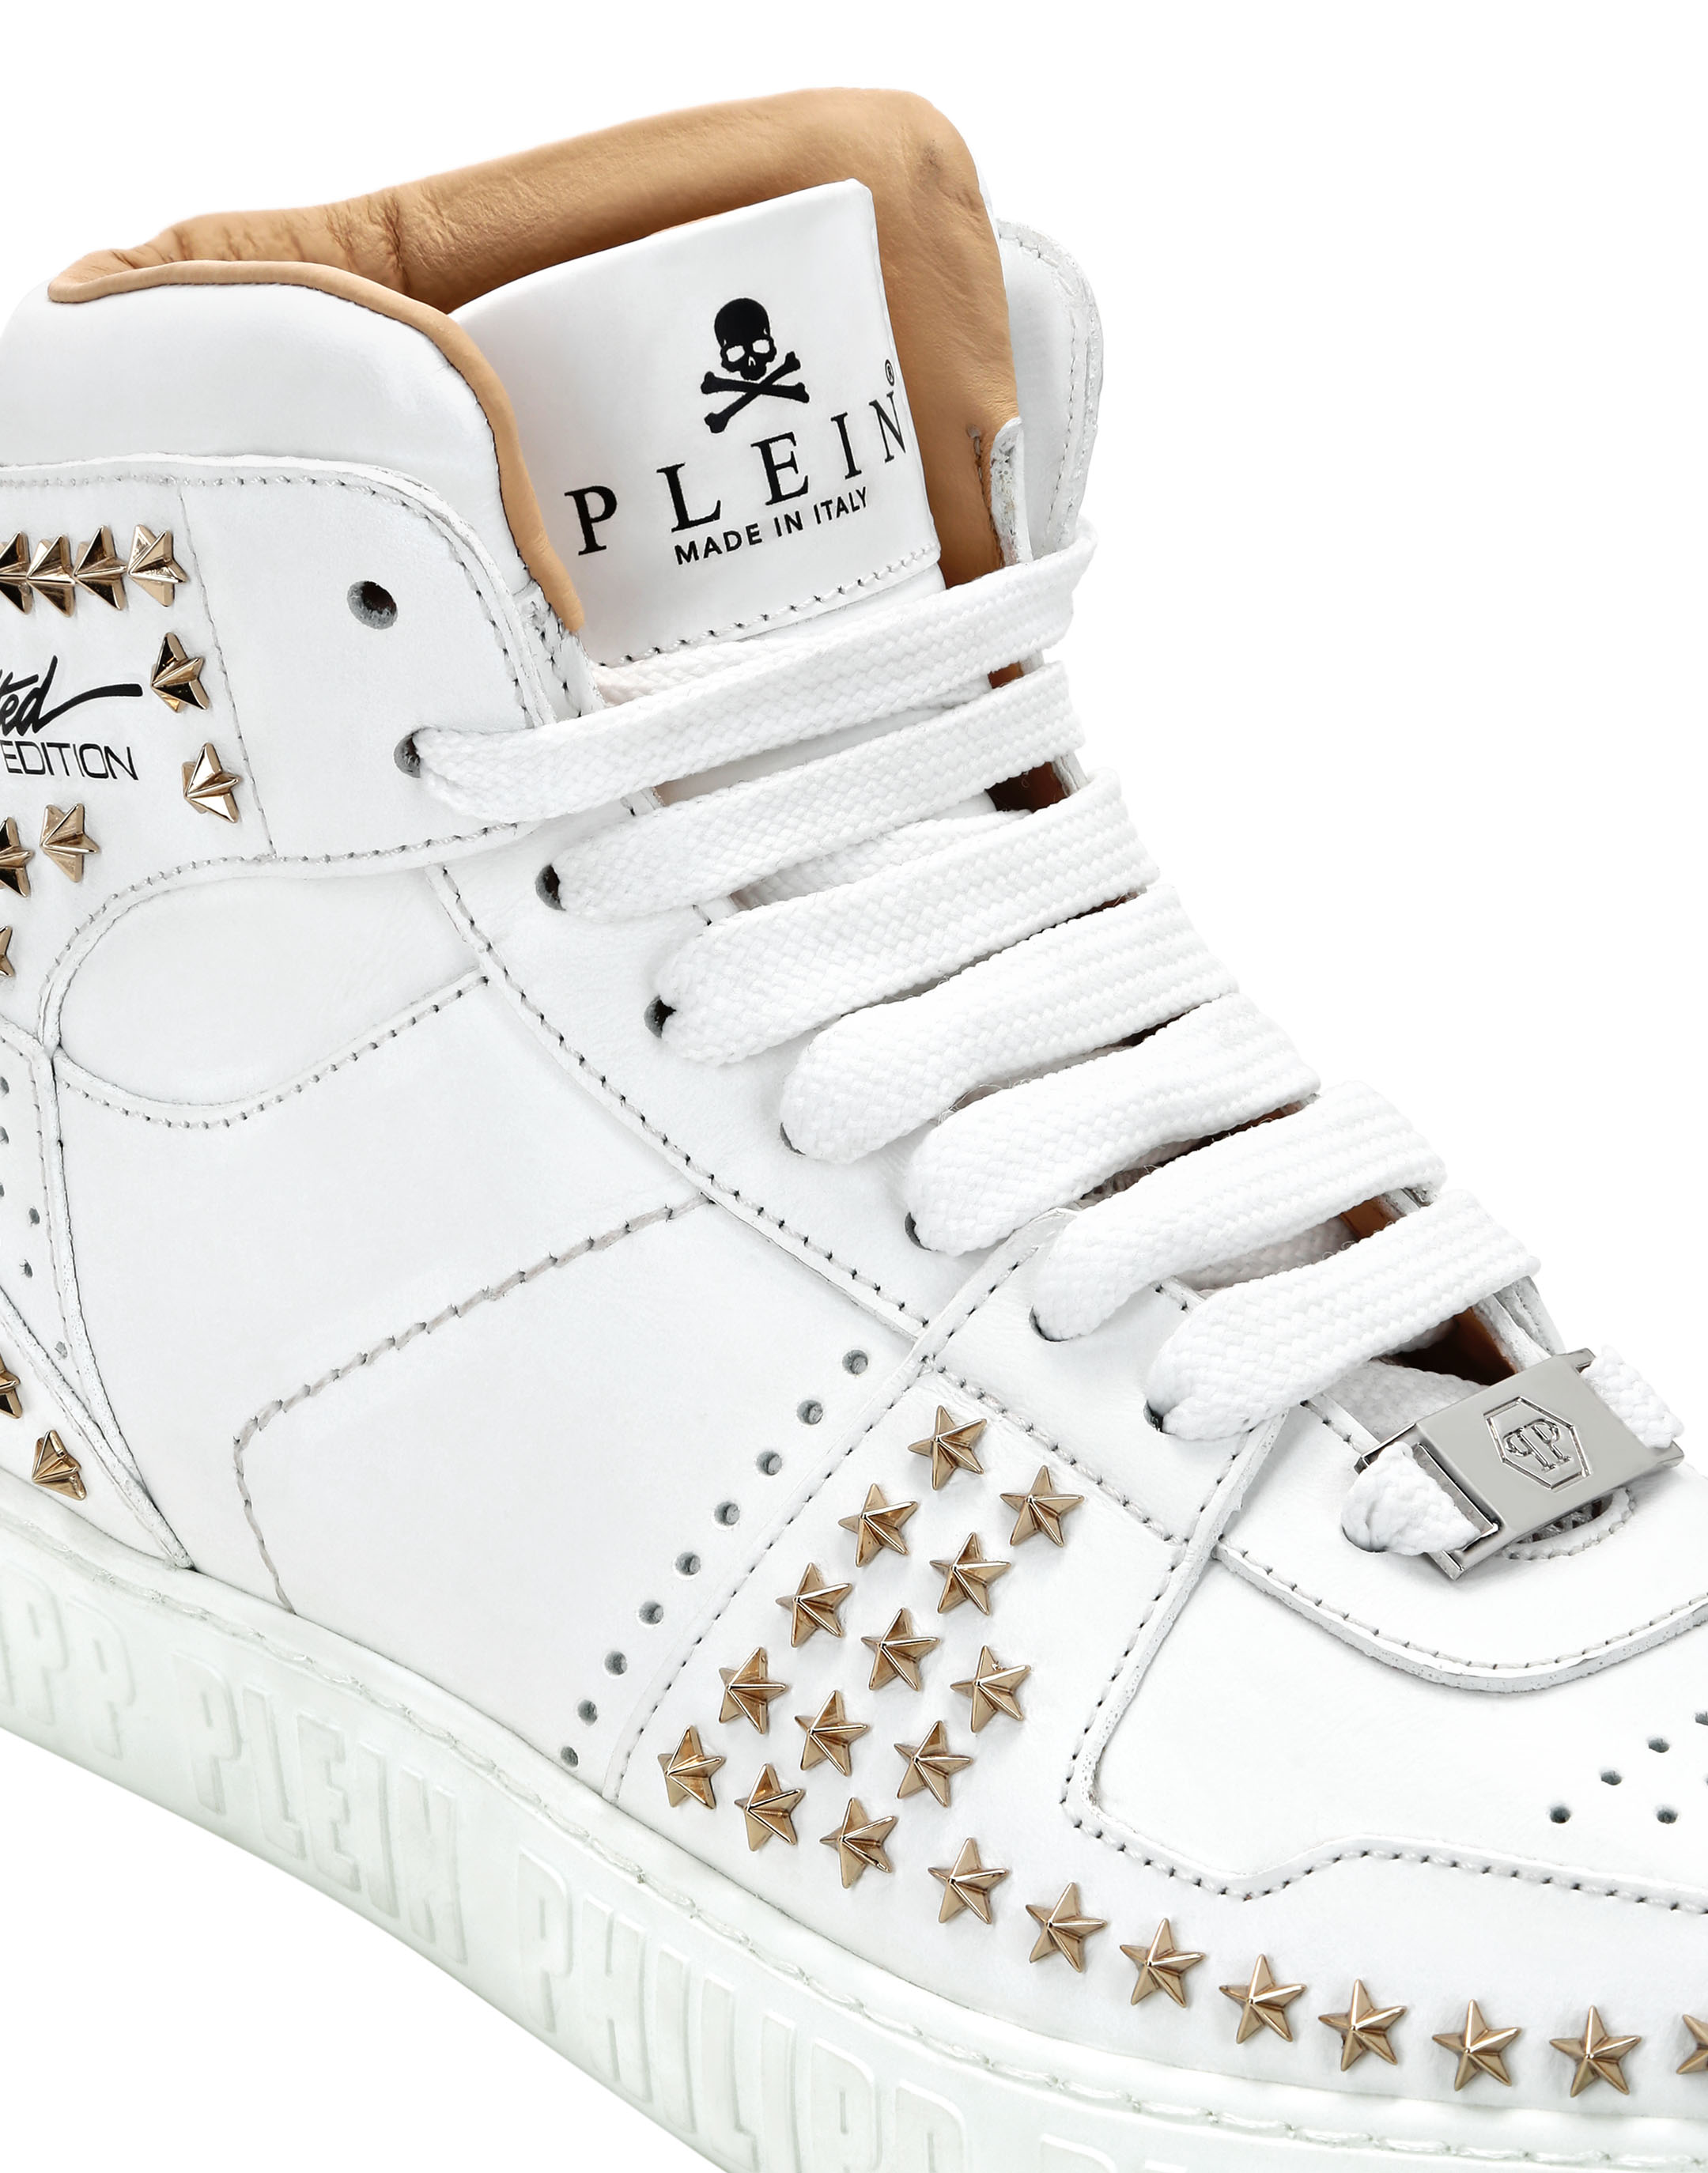 HI-TOP SNEAKERS NOTORIOUS RUBBERIZED STARS | Philipp Plein Outlet